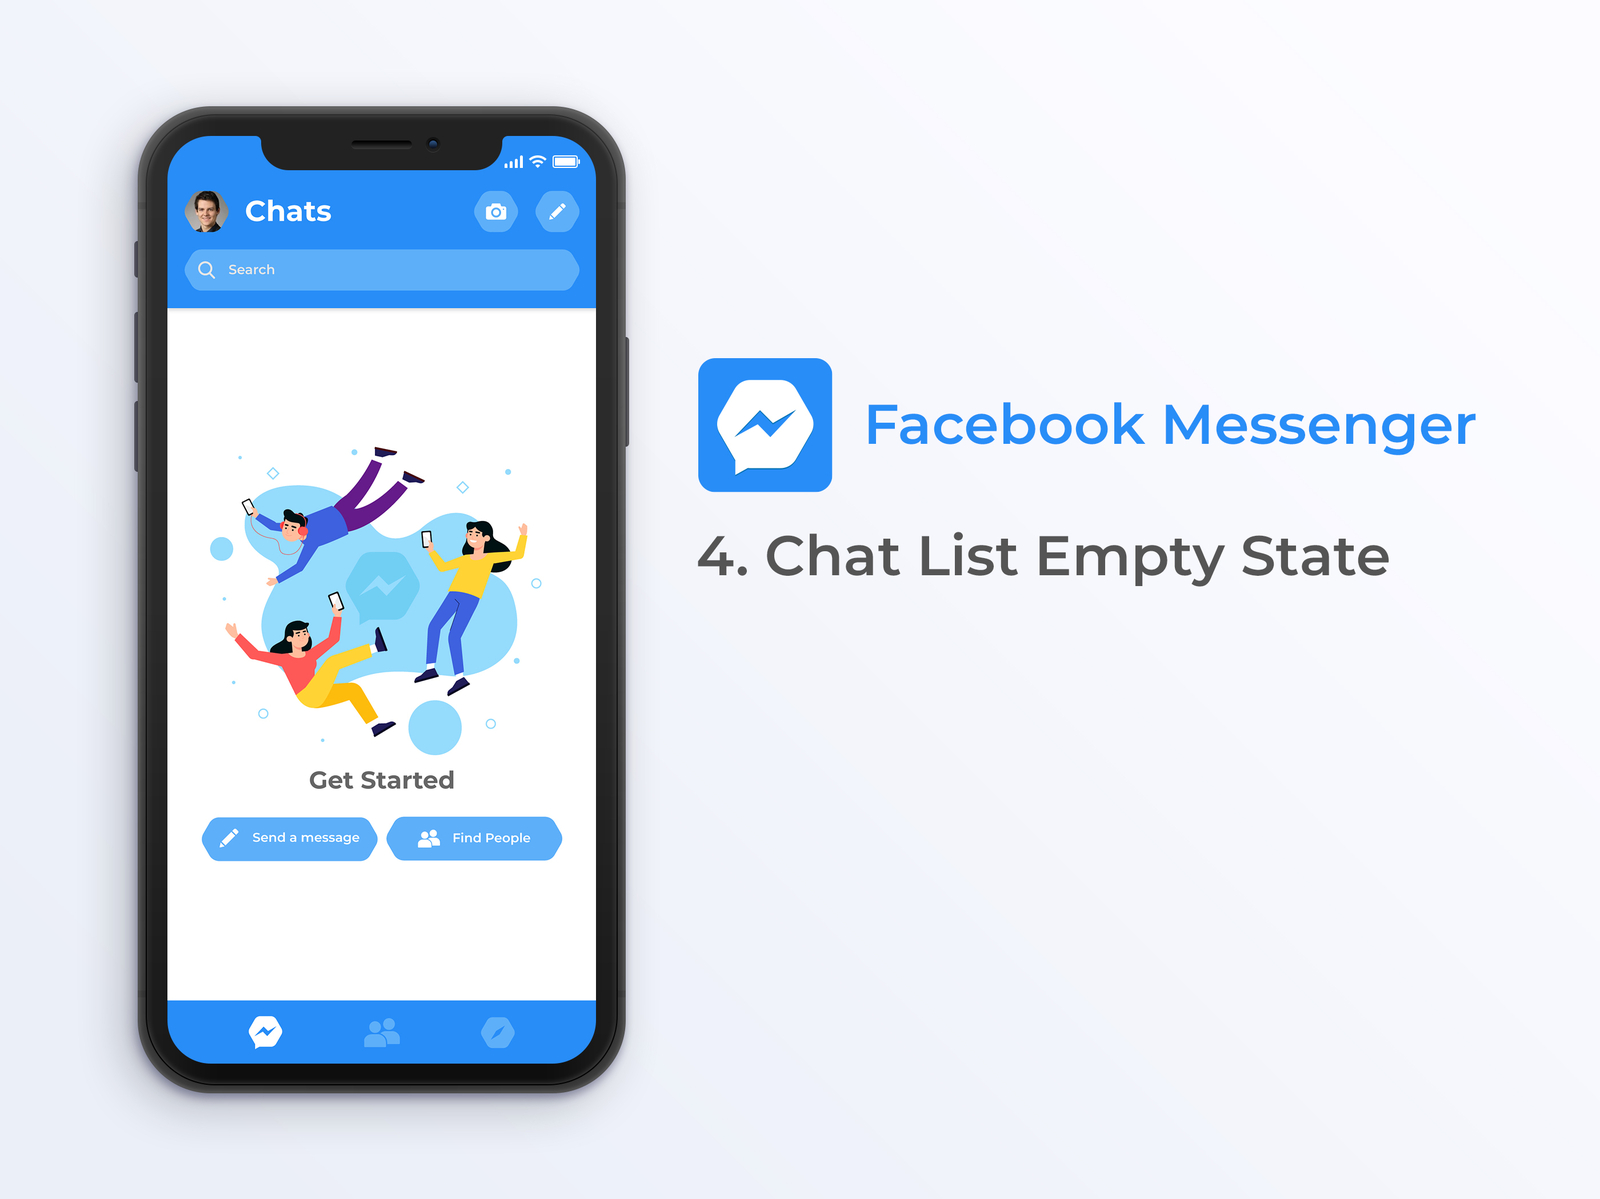 Facebook Messenger Revamp designed by Aakash Gokul S. Connect with them on ...